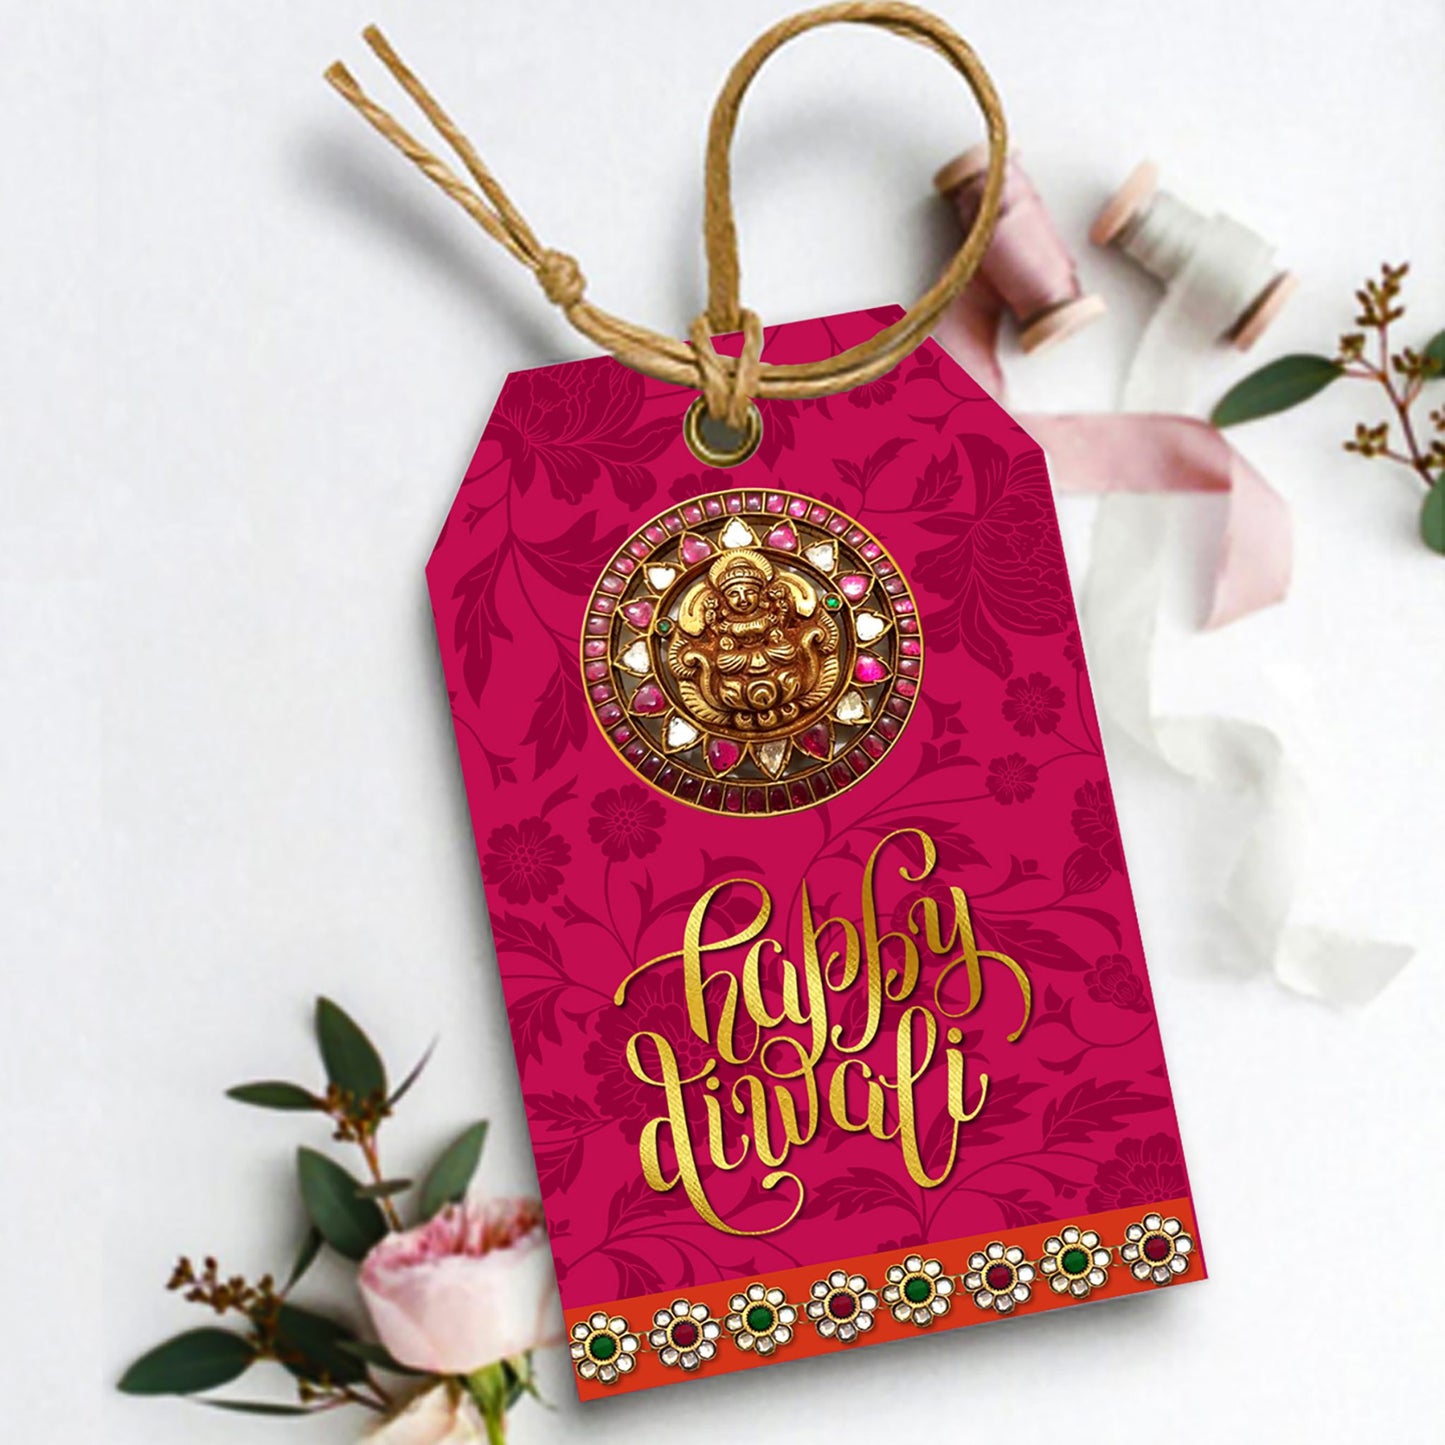 DIWALI gift Tags, rich jewel tone colours, Digital Print download,instant download, 2.25 x4 inch size, 1 sheet